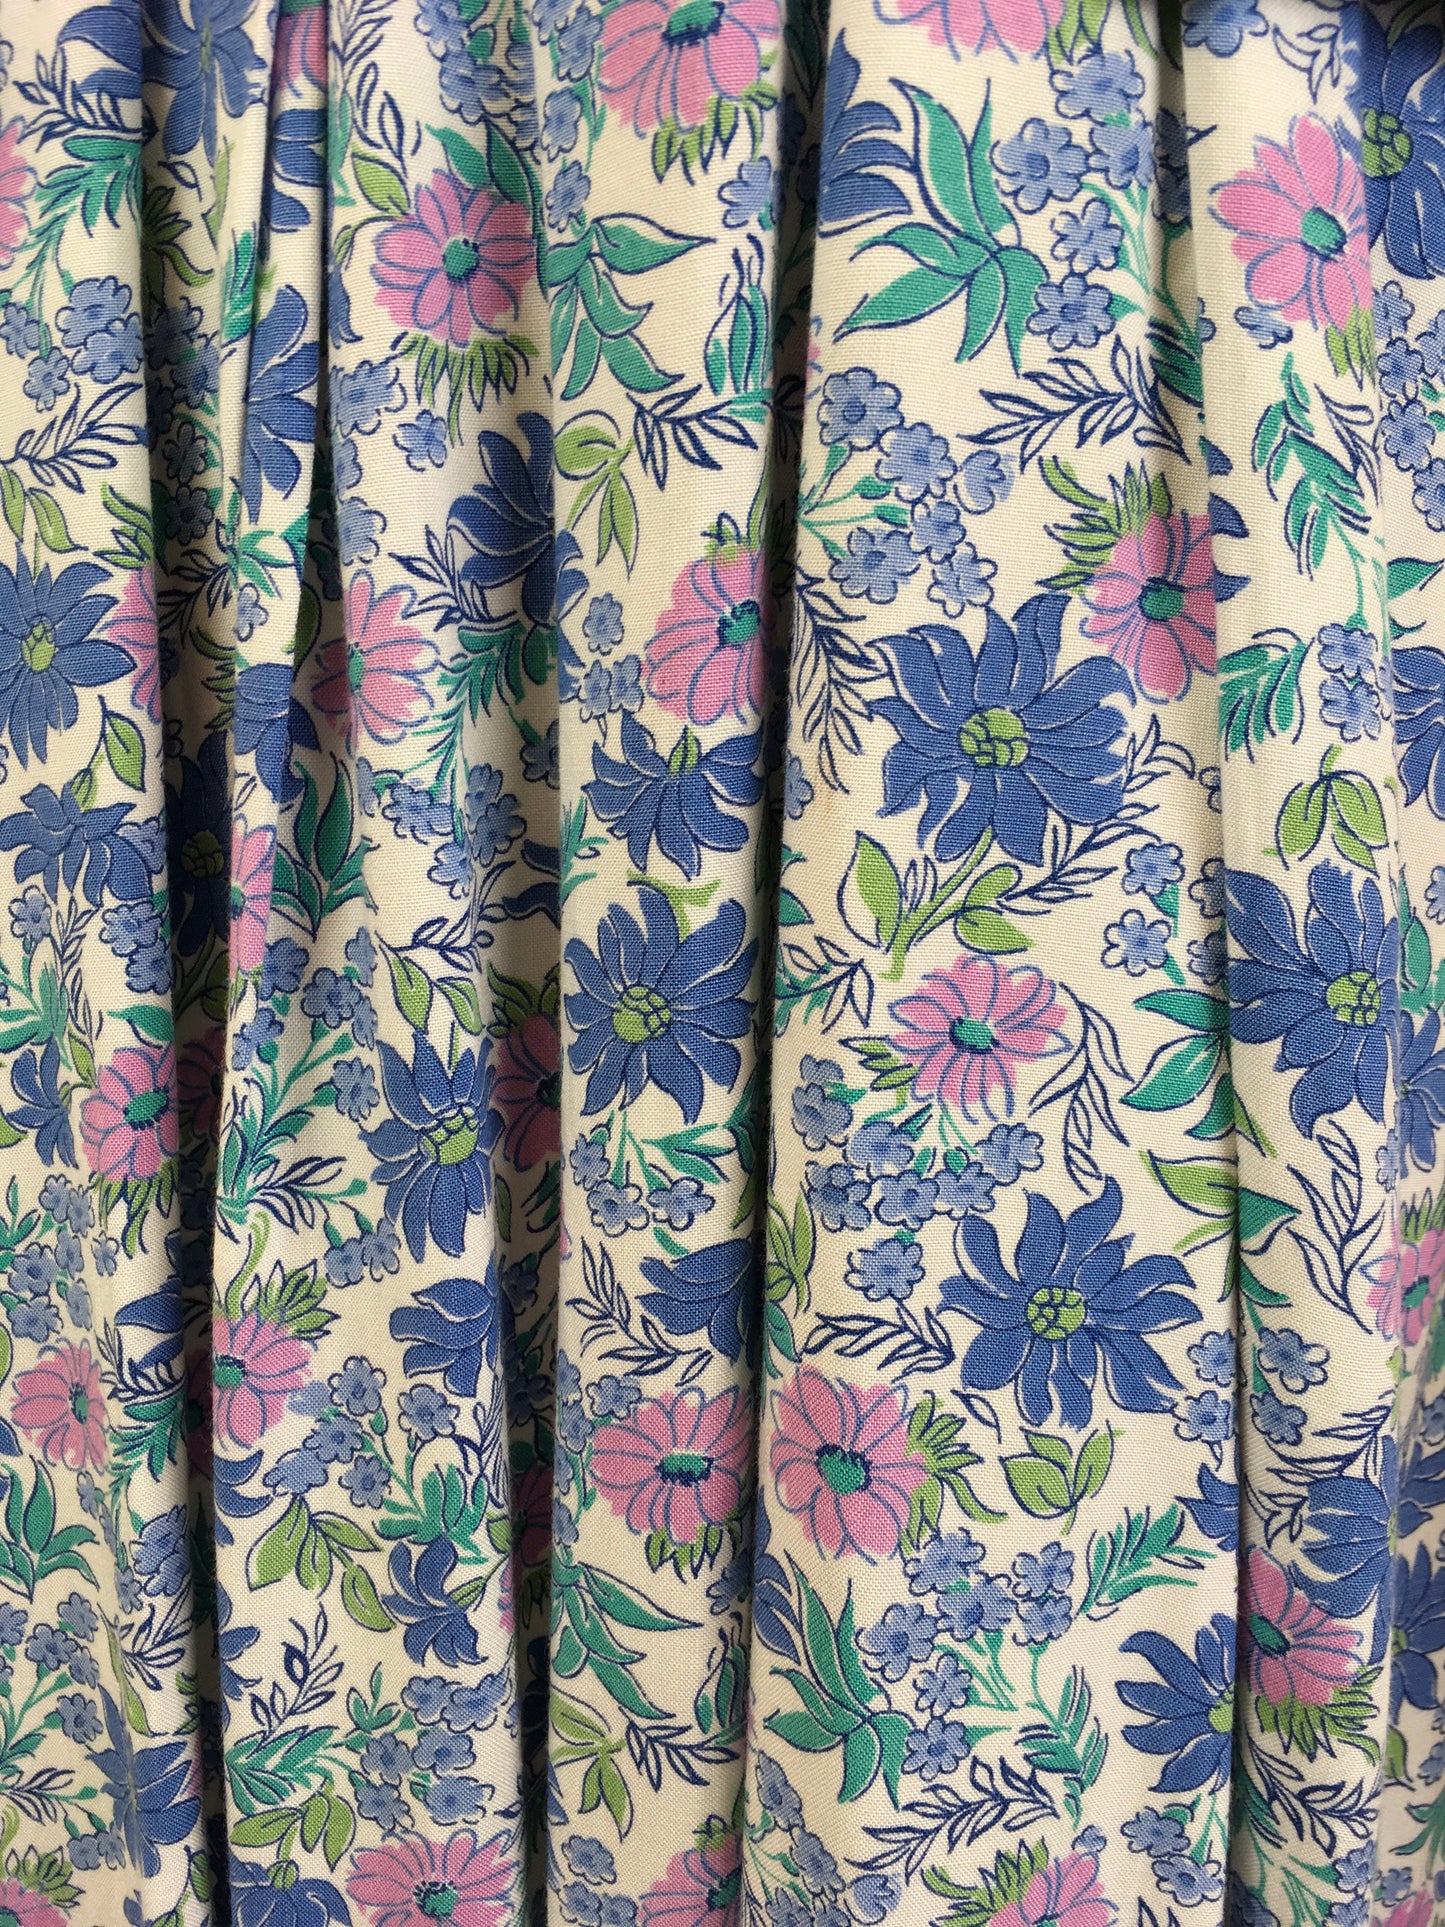 Original 1940’s Gorgeous Floral Cotton Day Dress - In Summertime Blues, Pinks, Purples & Greens